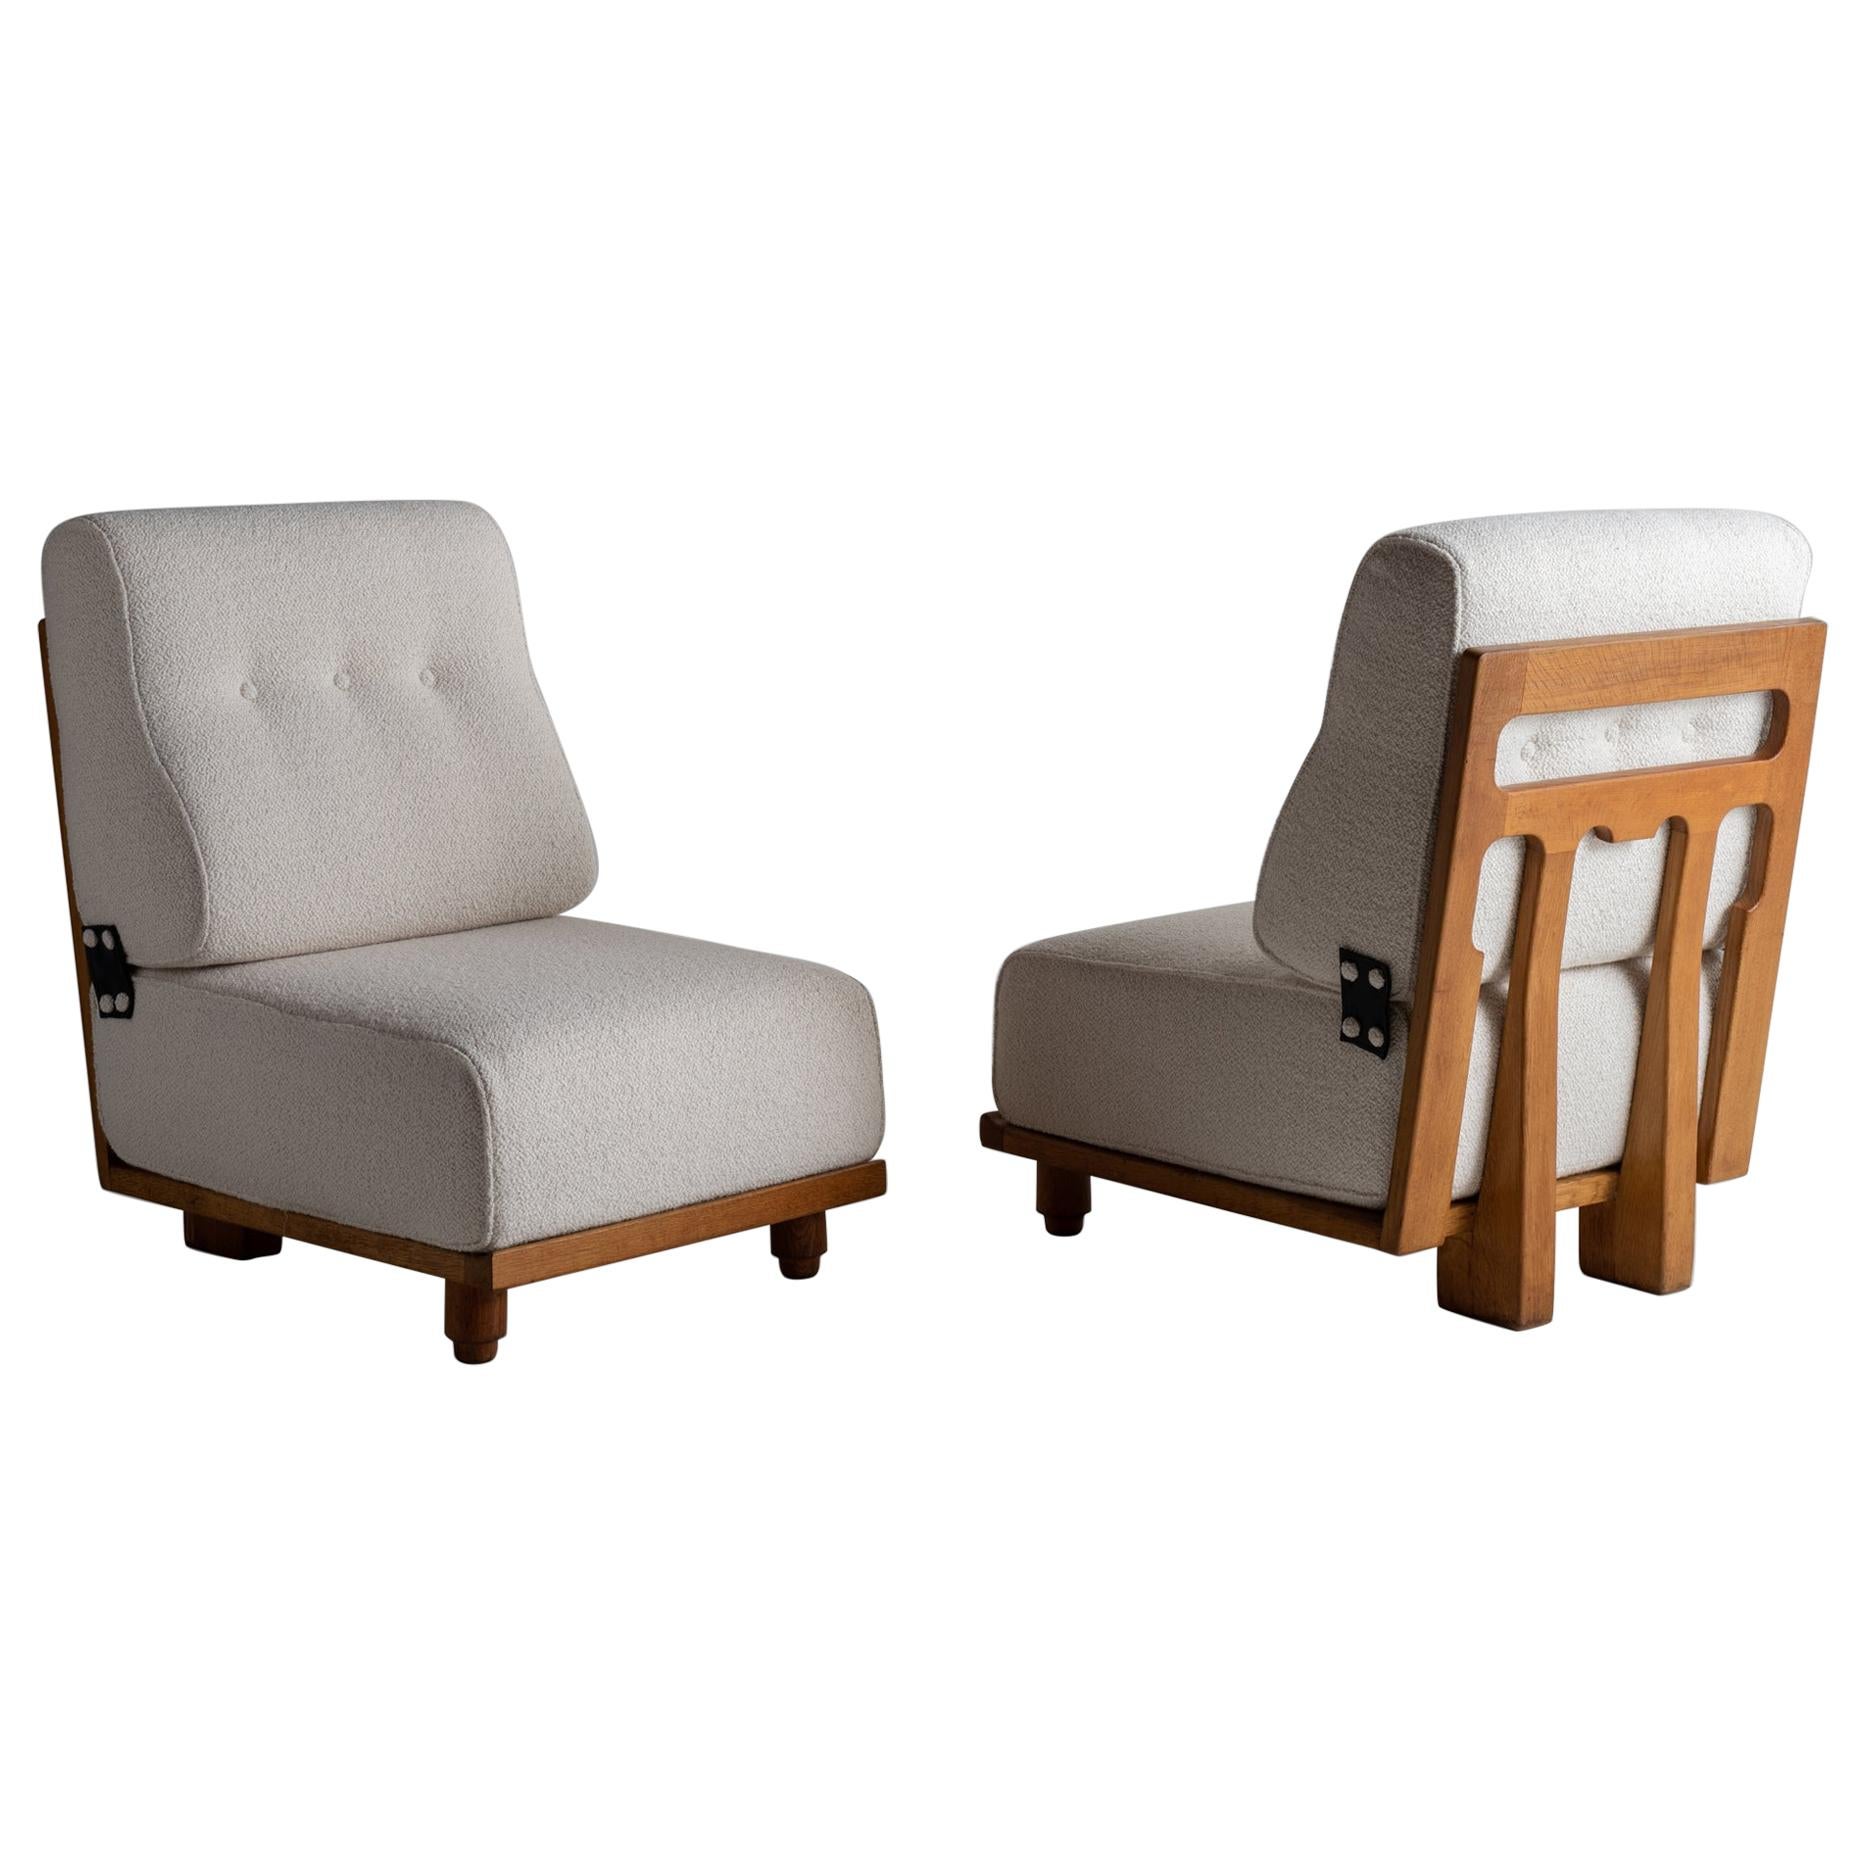 Guillerme & Chambron Slipper Chairs in Belgian Textured Wool Blend